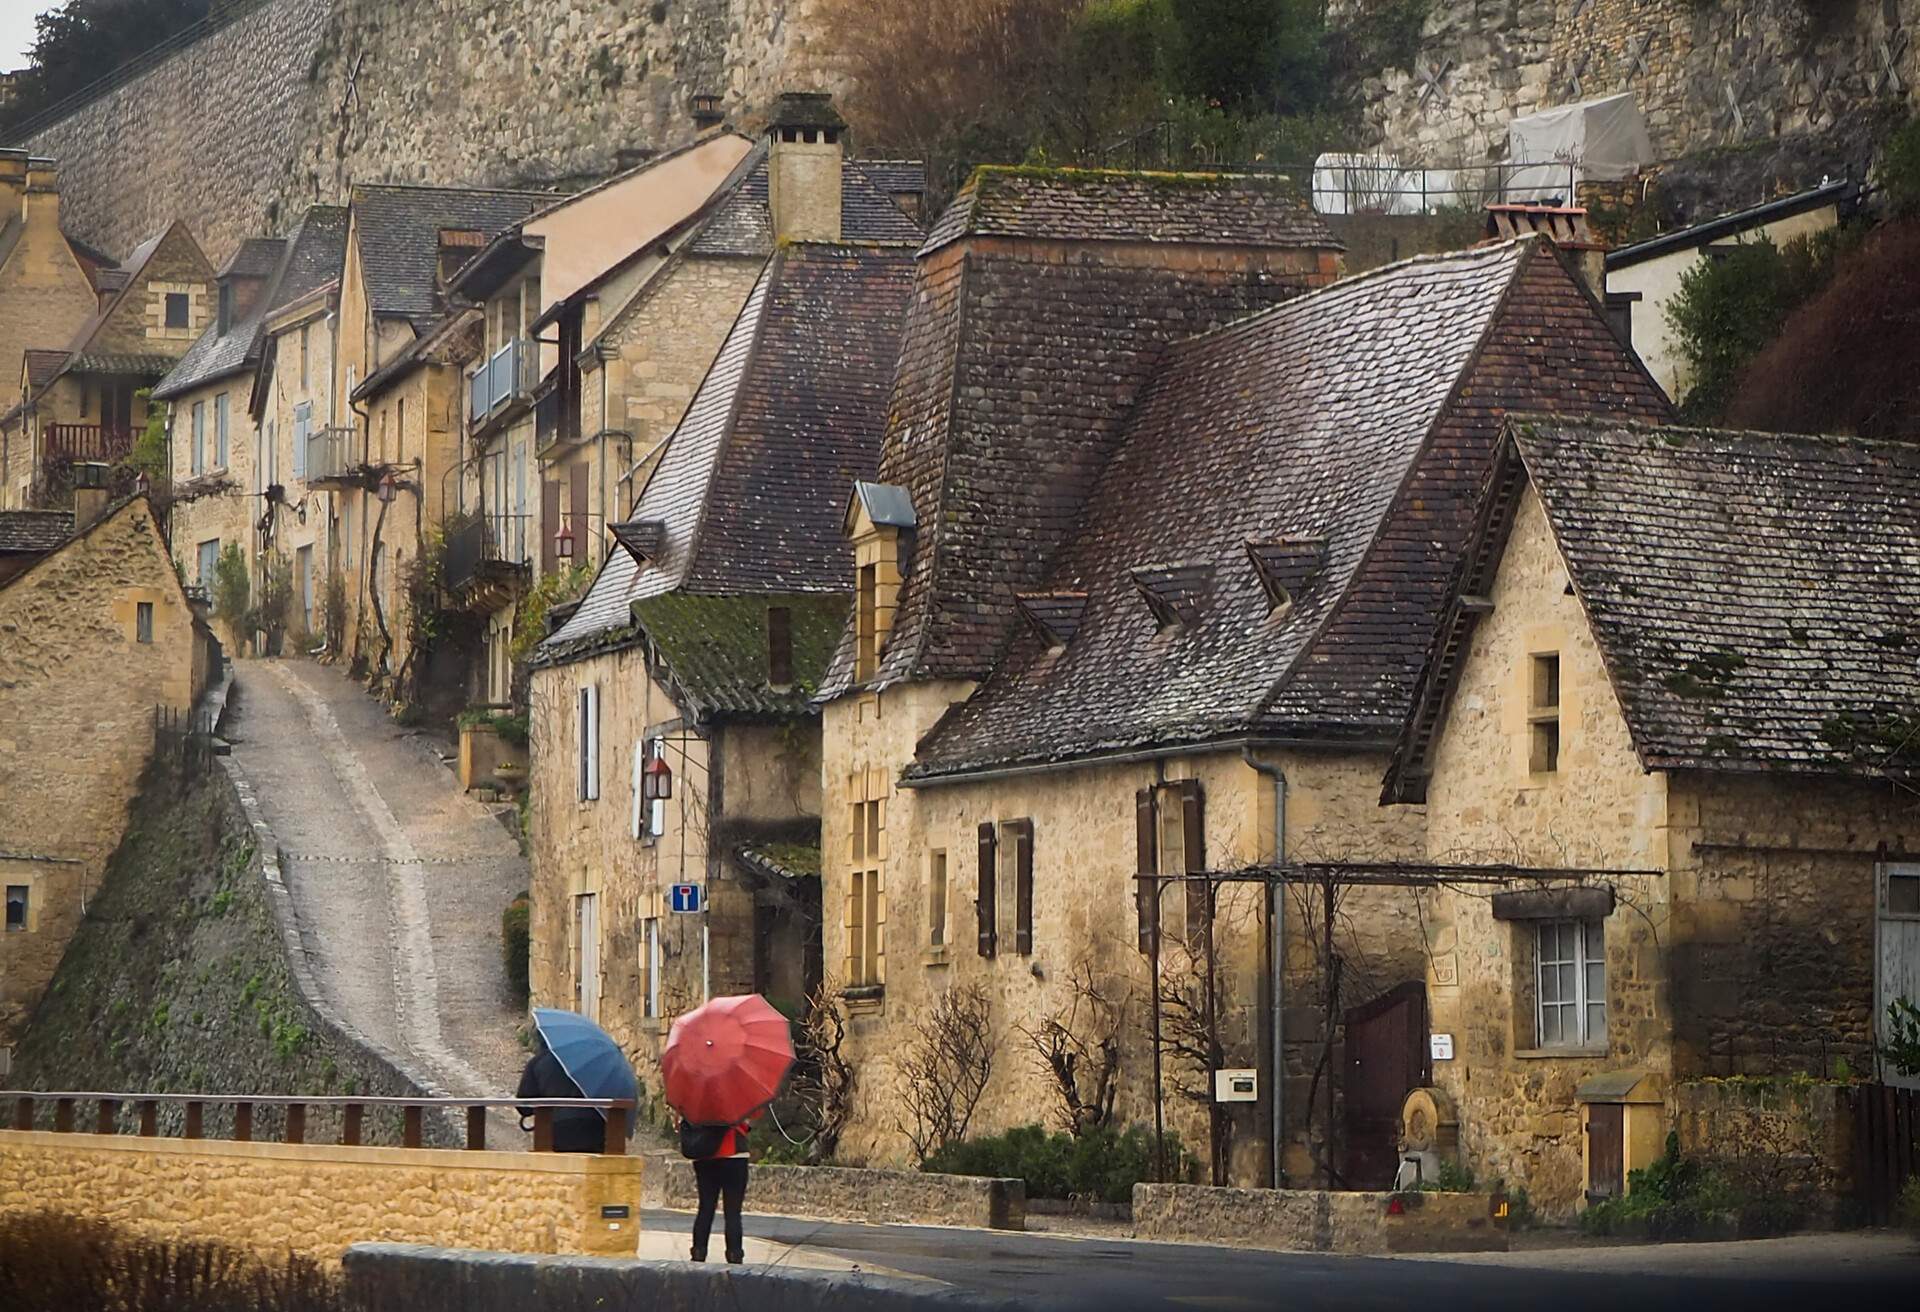 People with umbrellas stand outside the dirty-looking classic hillside stone houses.